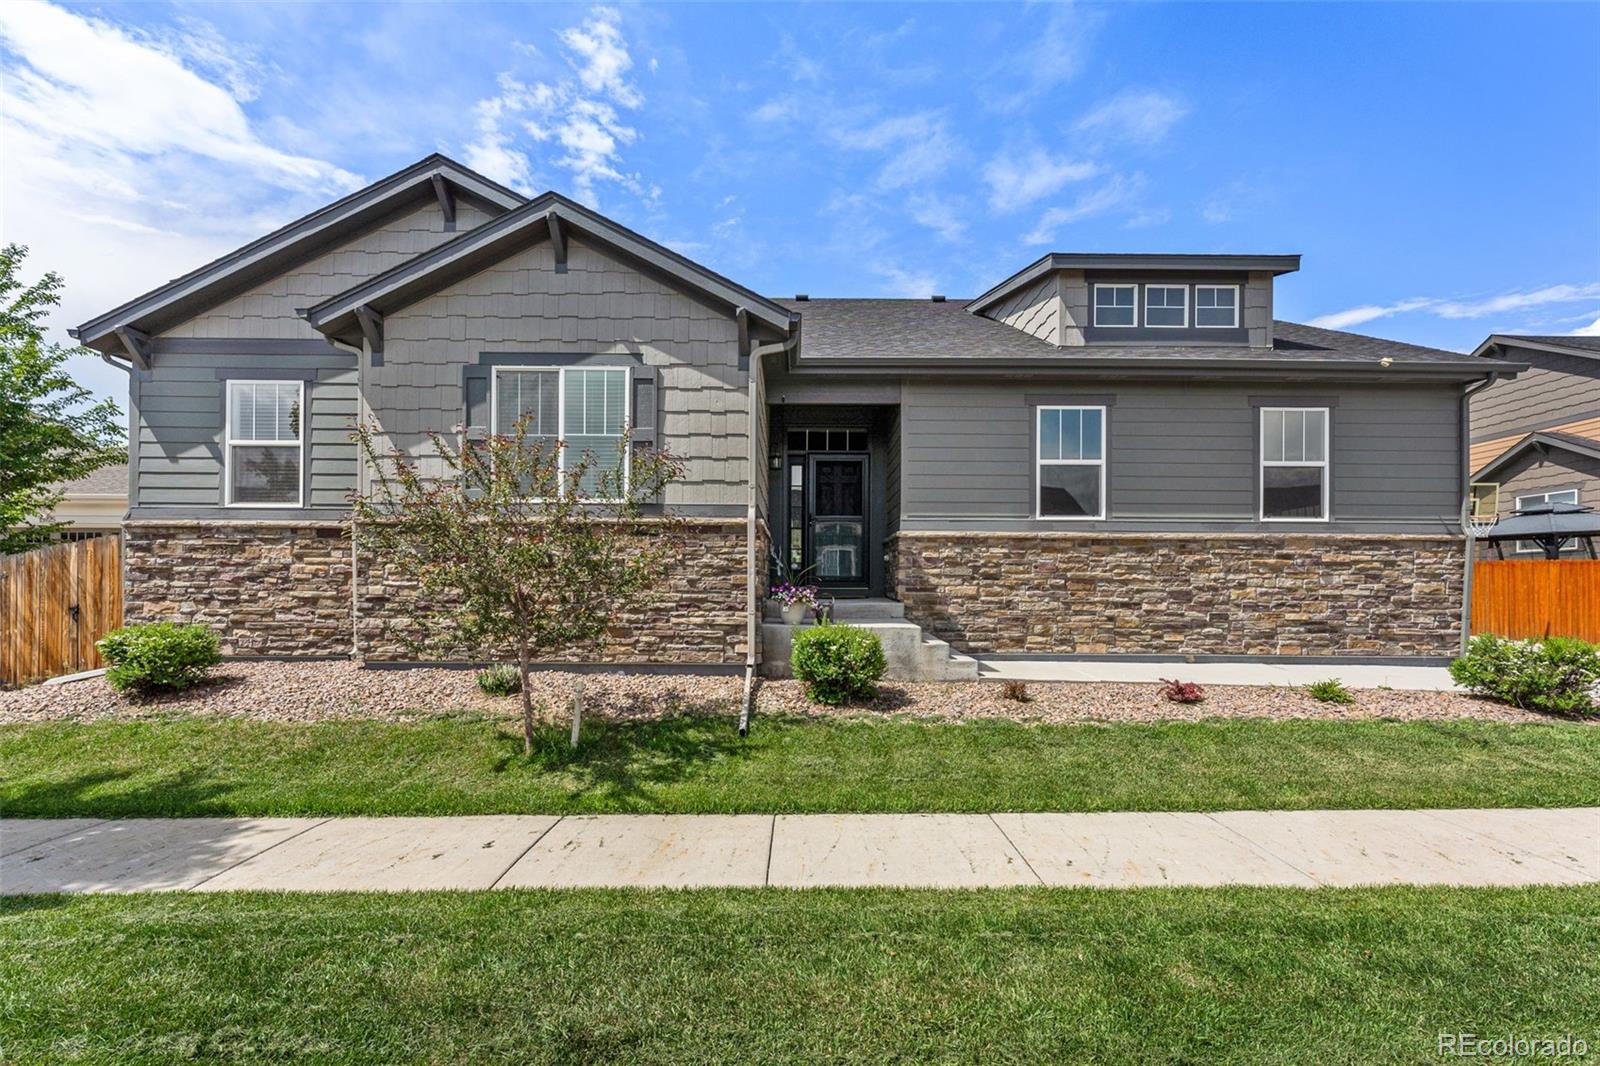 15955 E 112th Way, commerce city MLS: 3477188 Beds: 4 Baths: 3 Price: $715,000